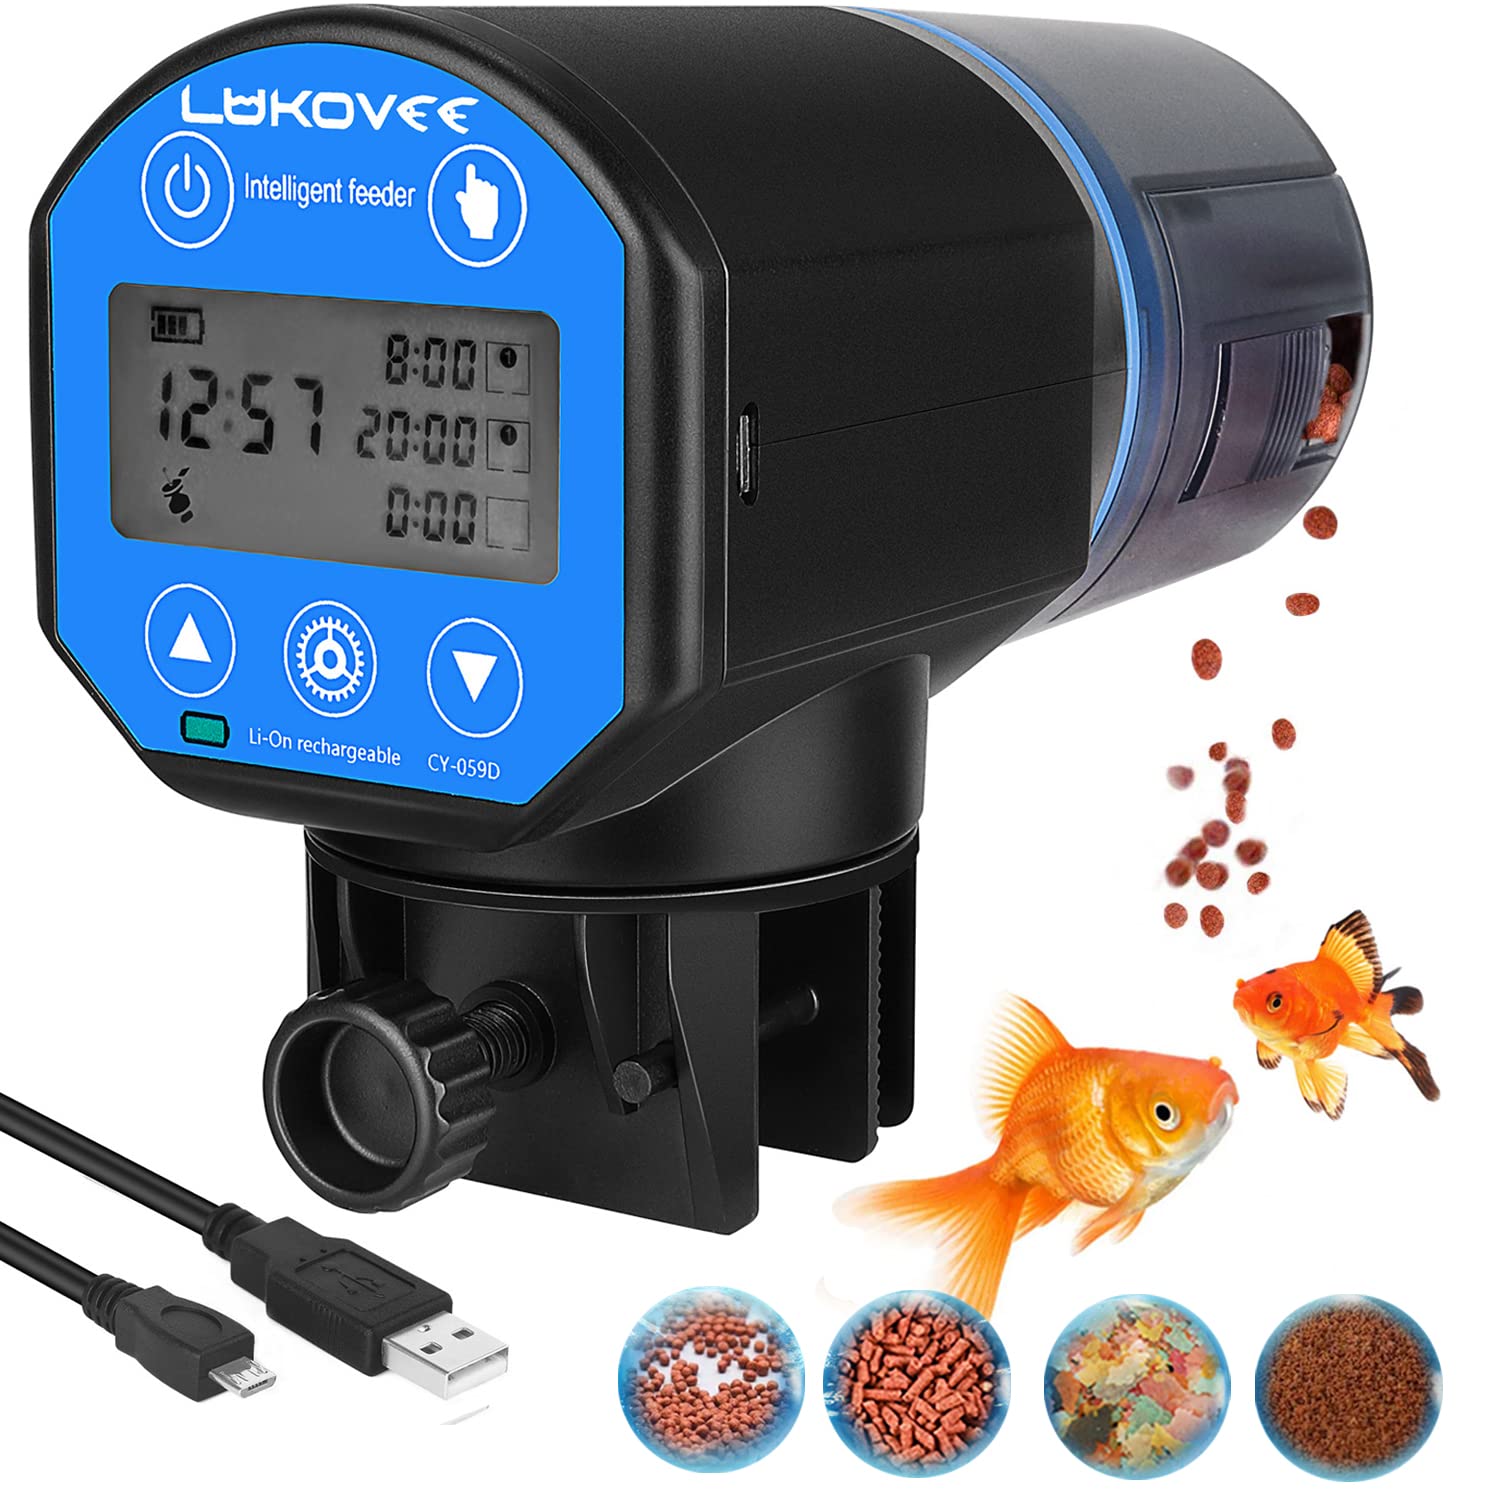 Lukovee Rechargeable Timer Fish Feeder: Automatic Dispenser for Weekend Vacations